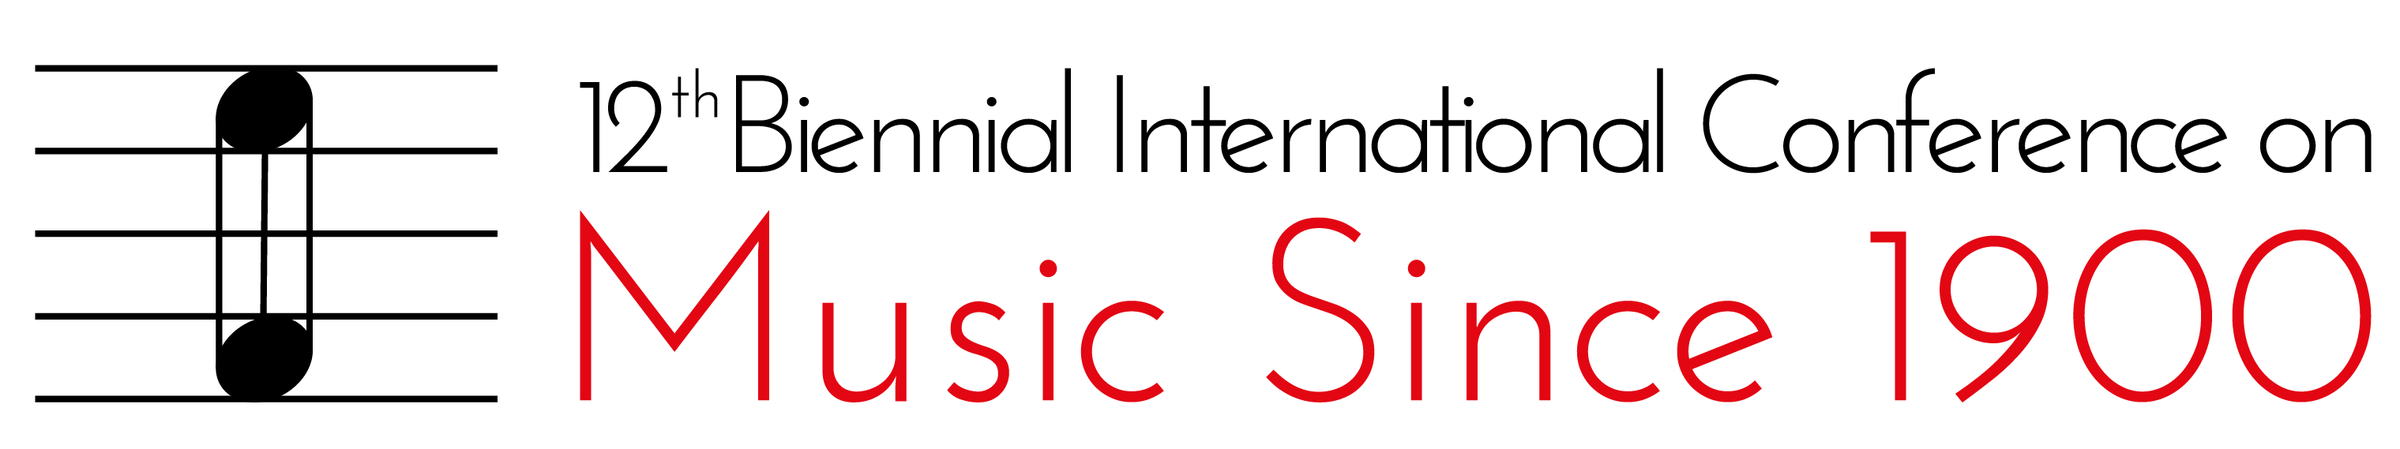 12th Biennial International Conference on Music Since 1900